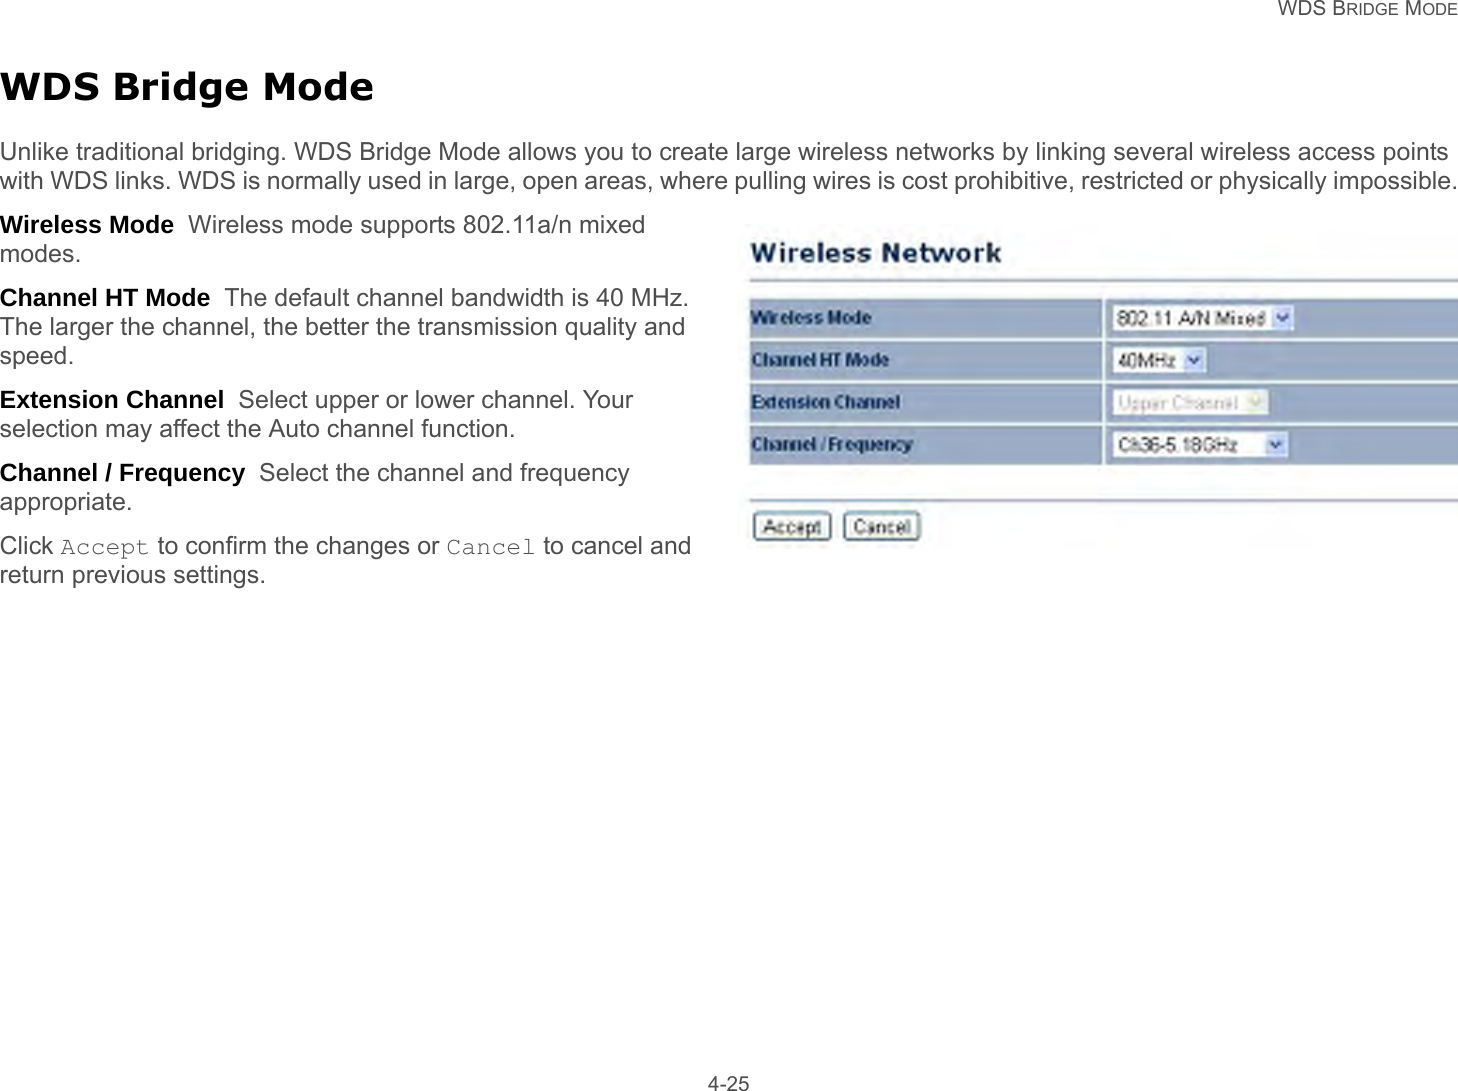  WDS BRIDGE MODE 4-25WDS Bridge ModeUnlike traditional bridging. WDS Bridge Mode allows you to create large wireless networks by linking several wireless access points with WDS links. WDS is normally used in large, open areas, where pulling wires is cost prohibitive, restricted or physically impossible.Wireless Mode  Wireless mode supports 802.11a/n mixed modes.Channel HT Mode  The default channel bandwidth is 40 MHz. The larger the channel, the better the transmission quality and speed.Extension Channel  Select upper or lower channel. Your selection may affect the Auto channel function.Channel / Frequency  Select the channel and frequency appropriate.Click Accept to confirm the changes or Cancel to cancel and return previous settings.